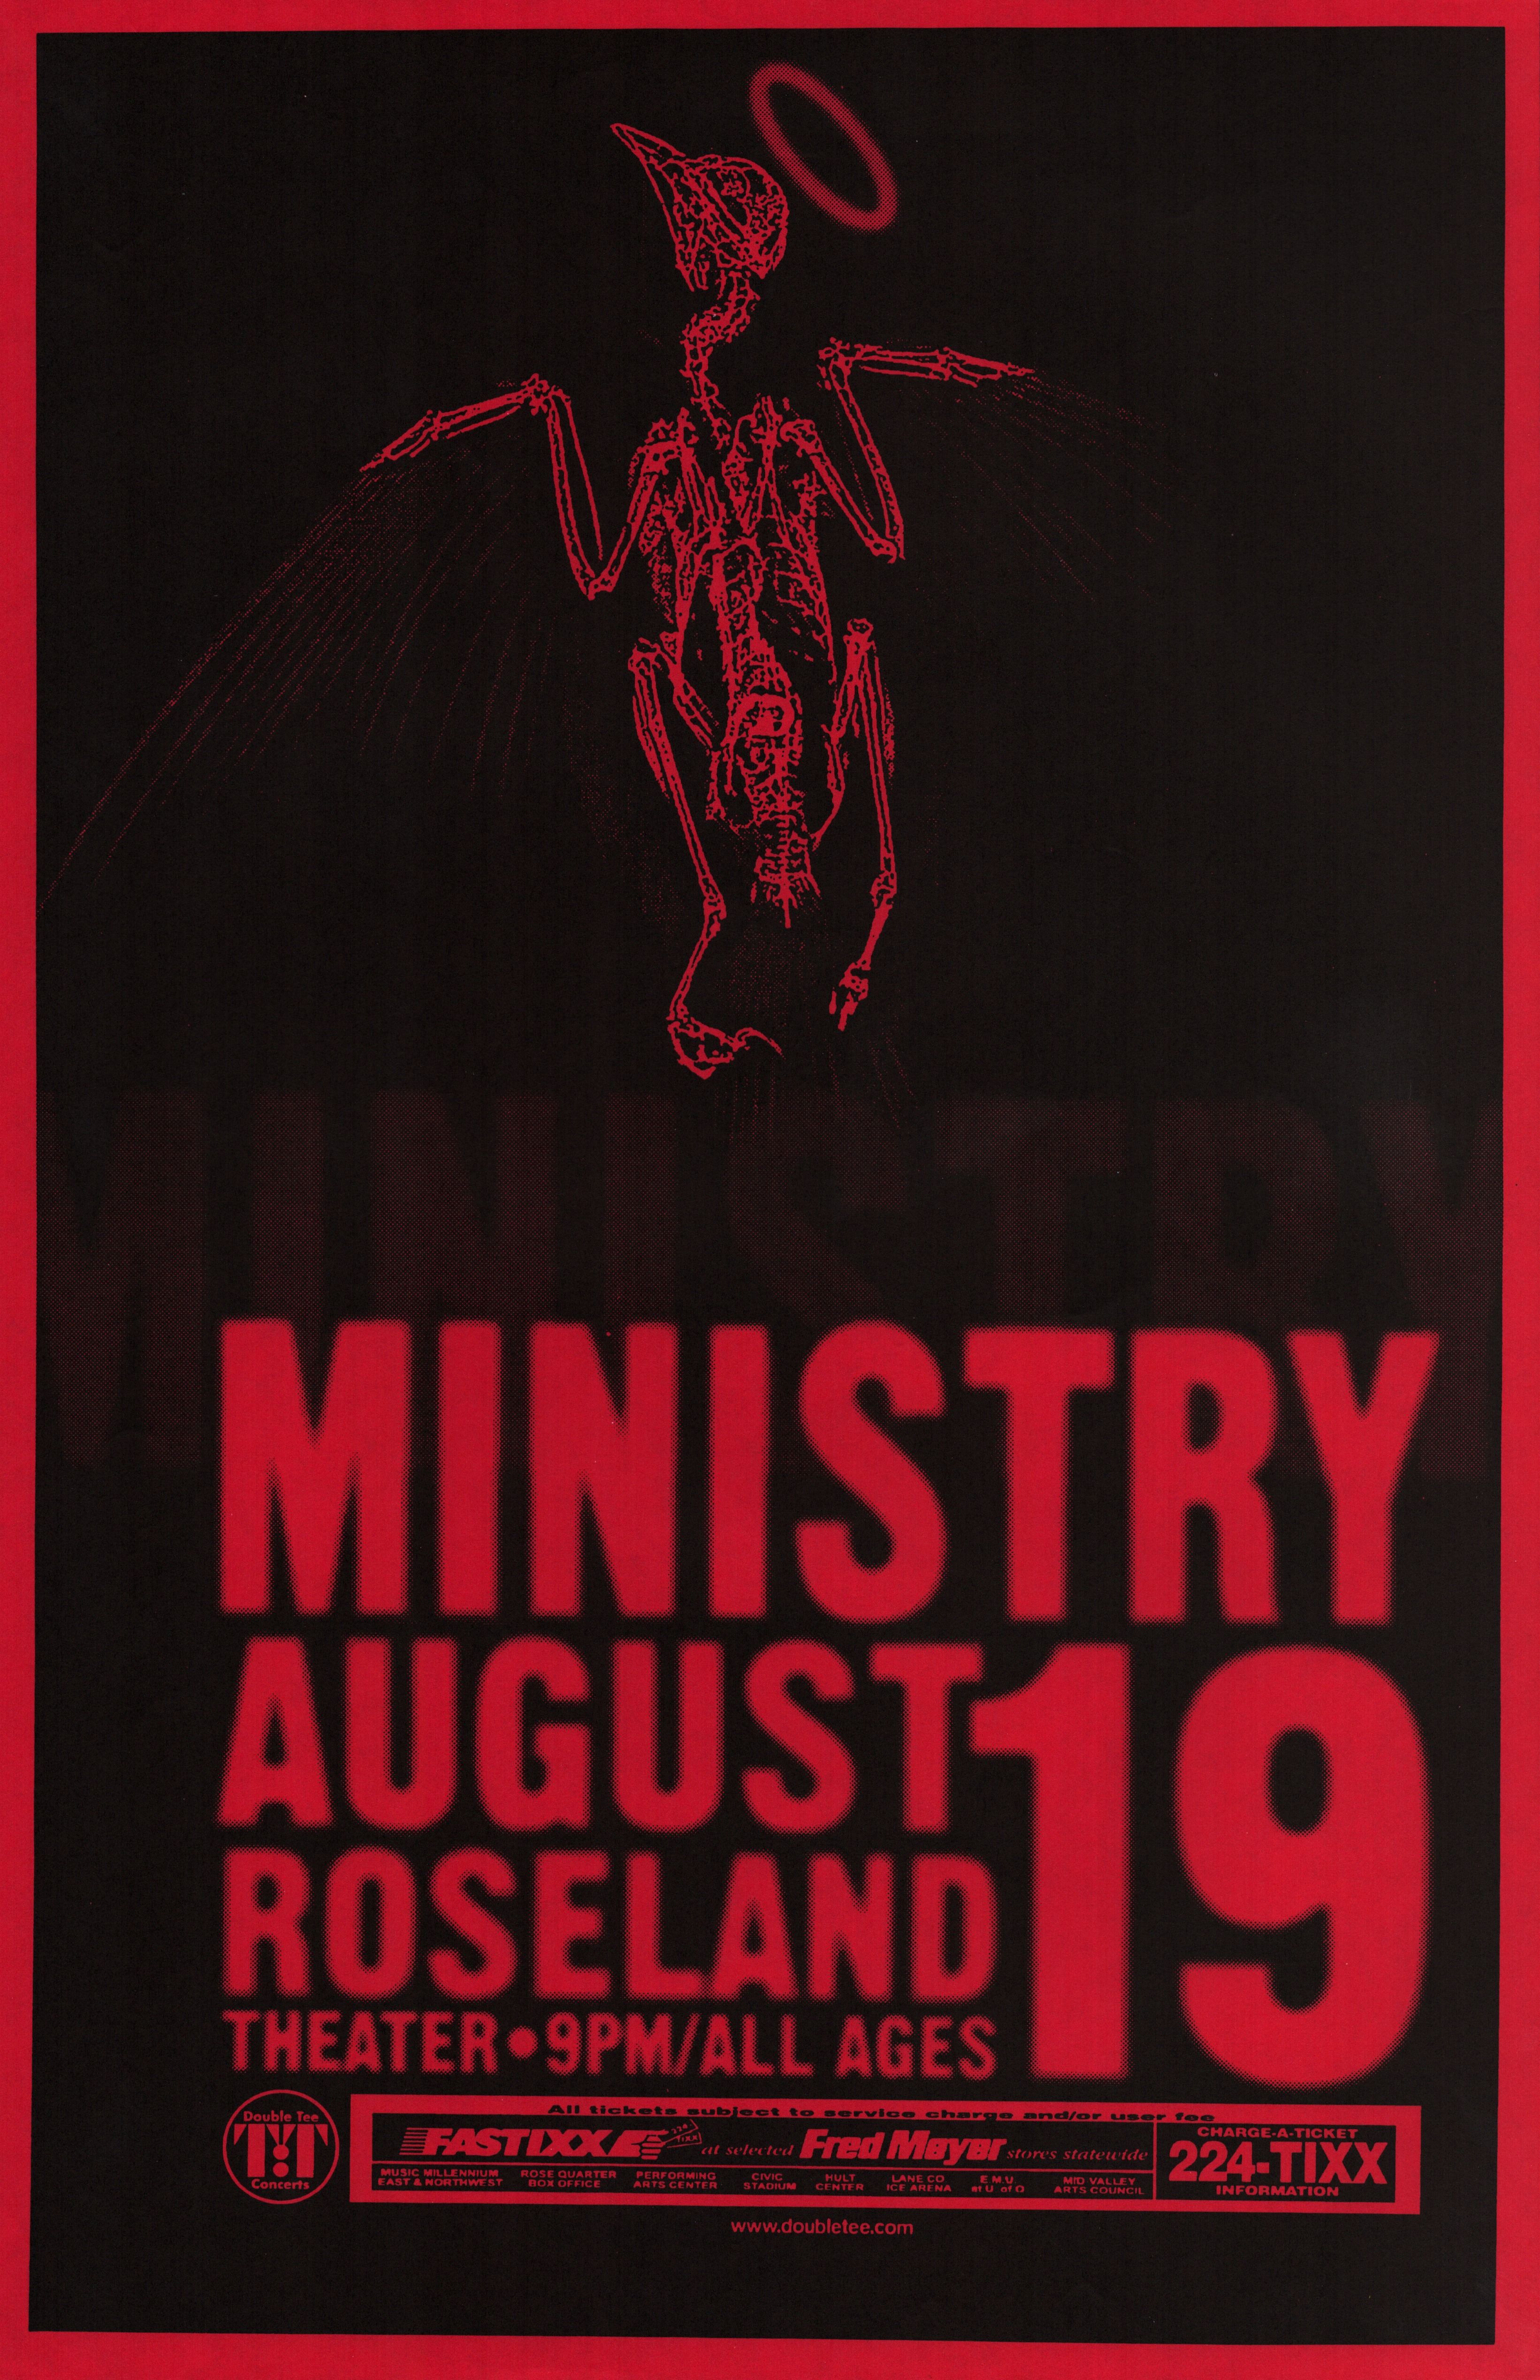 MXP-50.4 Ministry 1999 Roseland Theater  Aug 19 Concert Poster